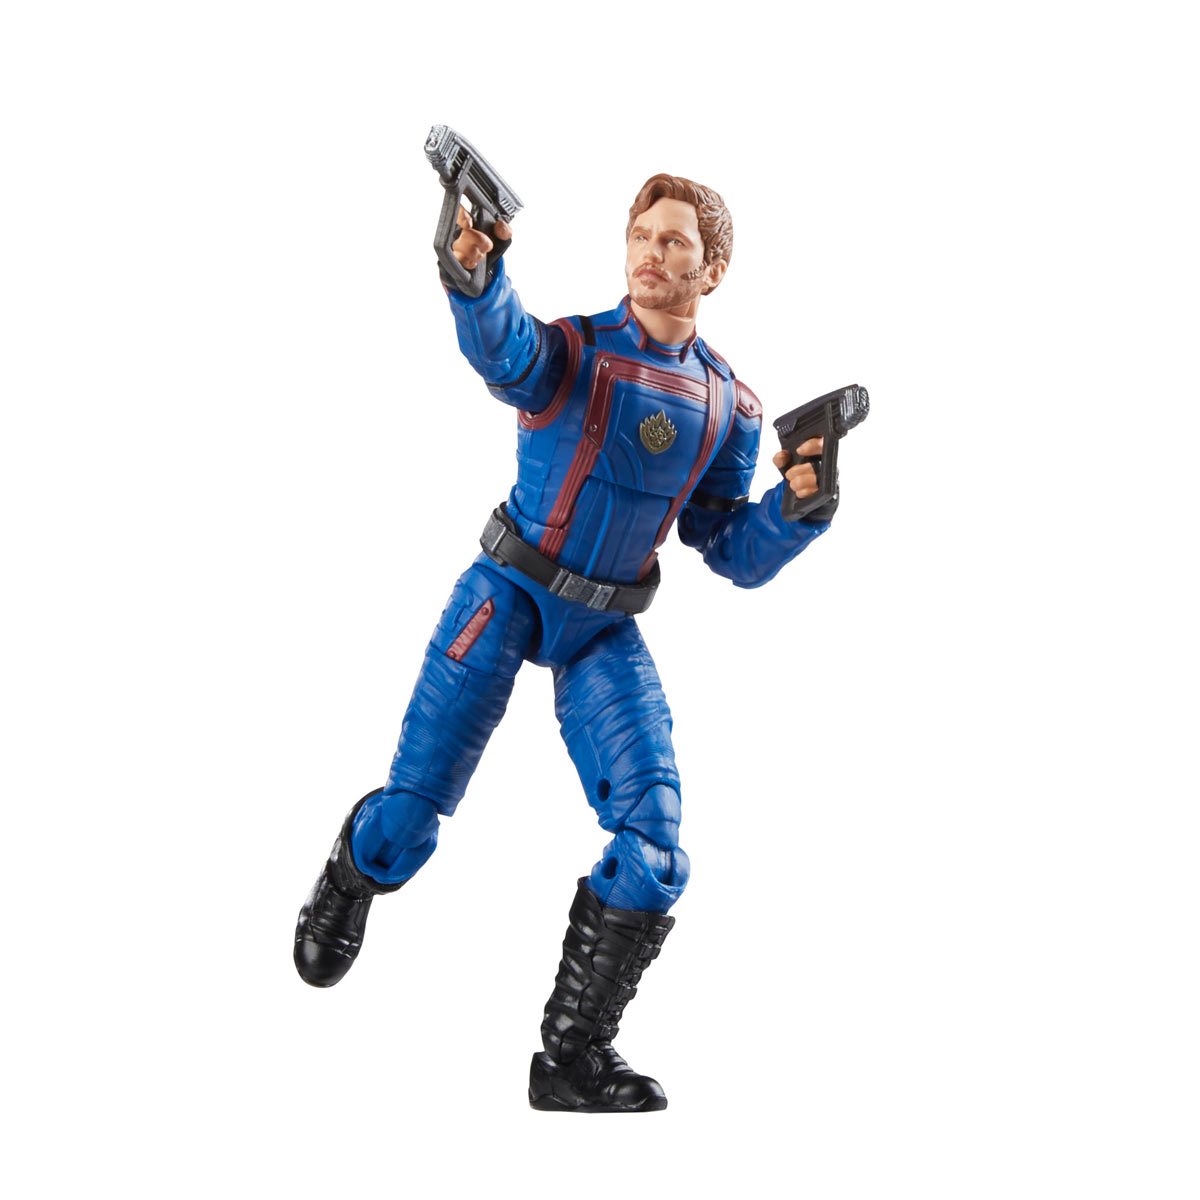 FLYGUYtoys Marvel Legends - Guardians of the Galaxy Classic Star-Lord 6  Action Figure Figure Review 